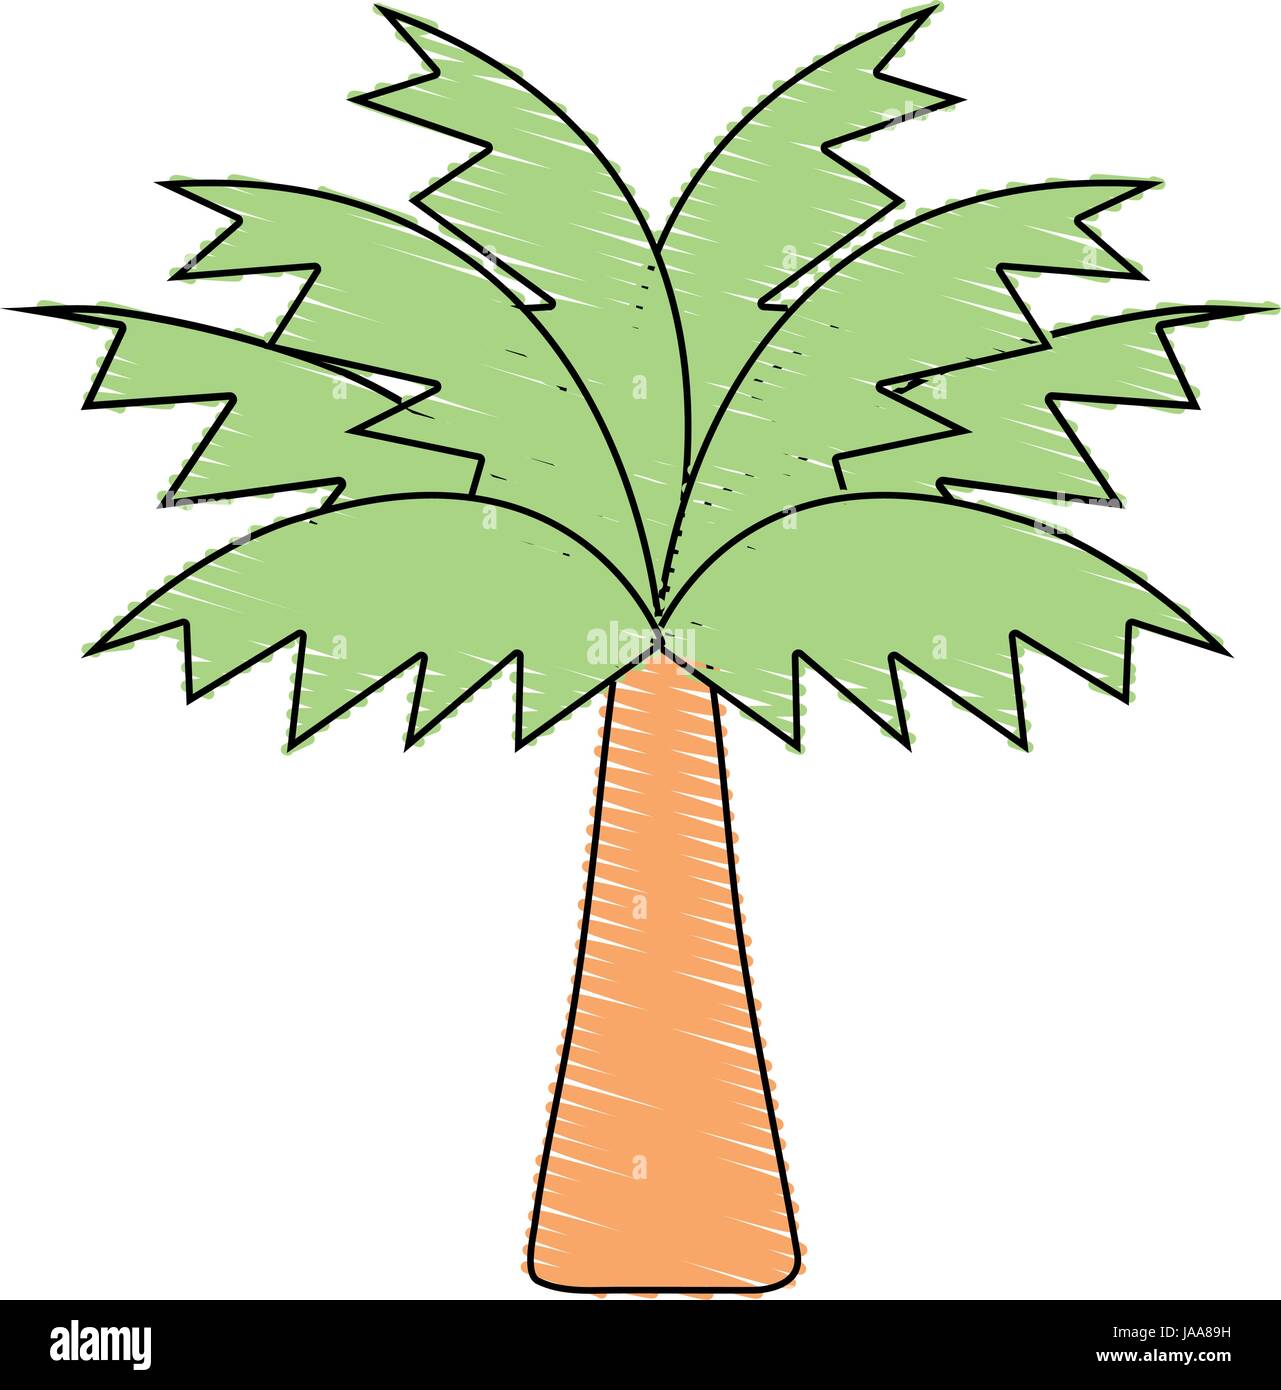 palm tree with leaves and vegetation Stock Vector